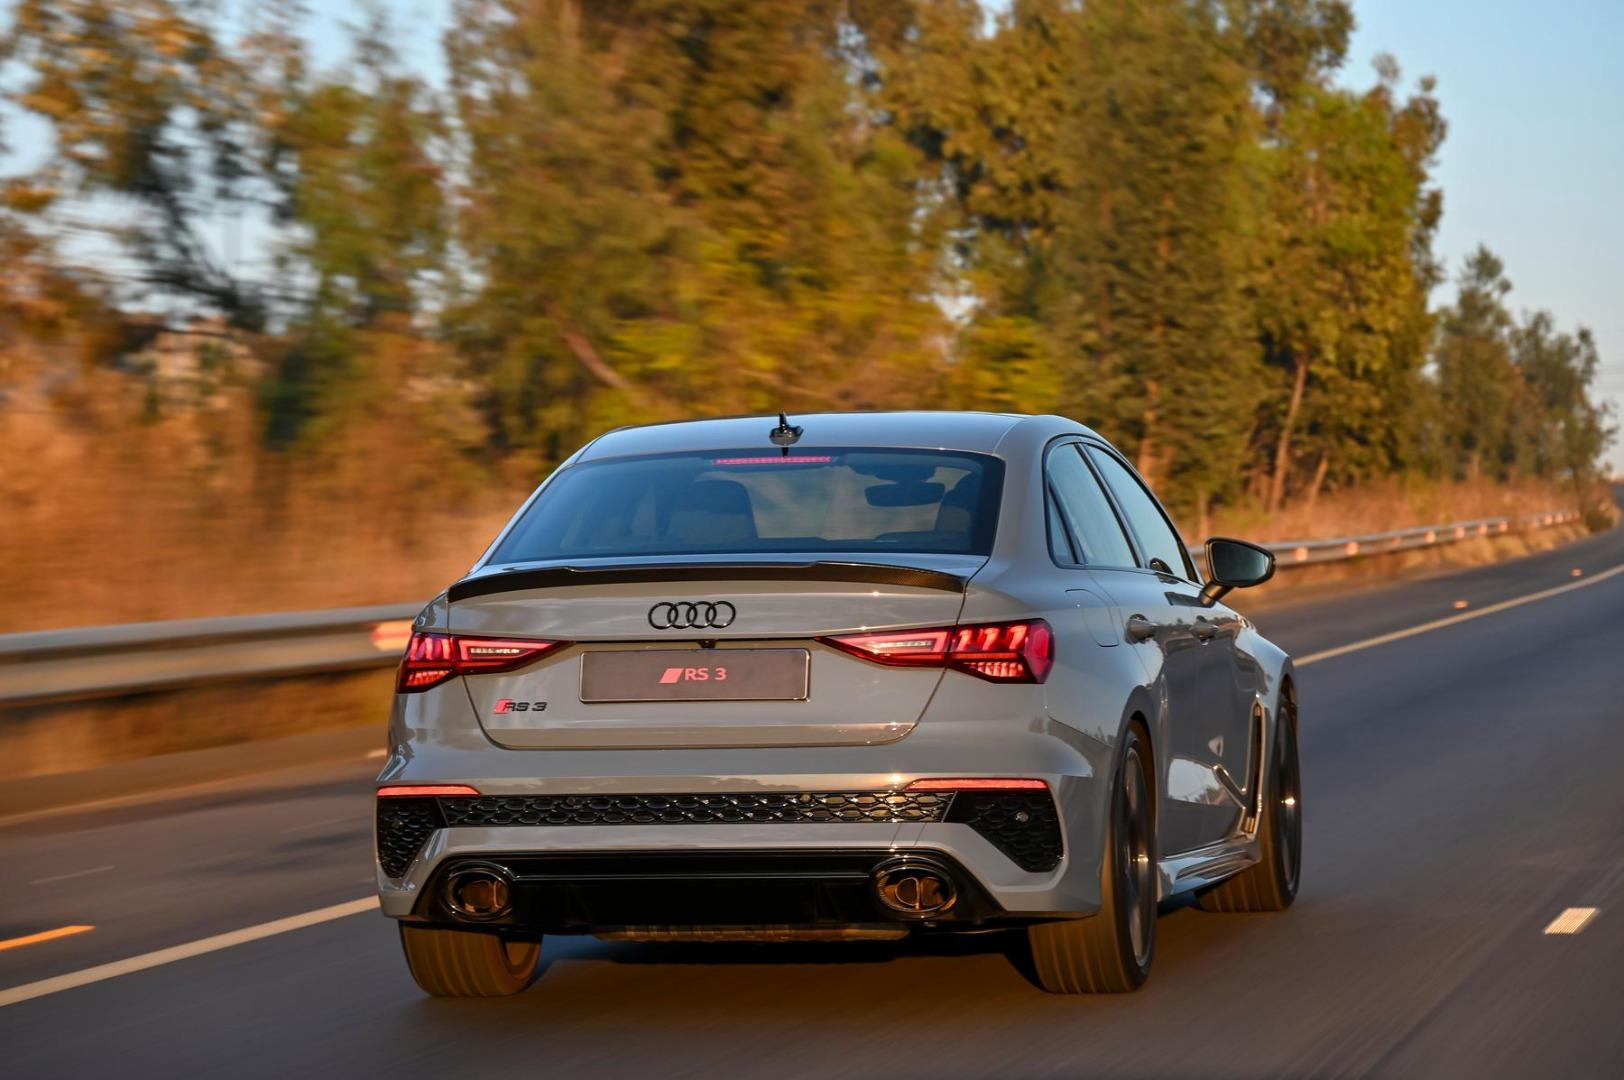 how many airbags does a audi rs3 sedan have?